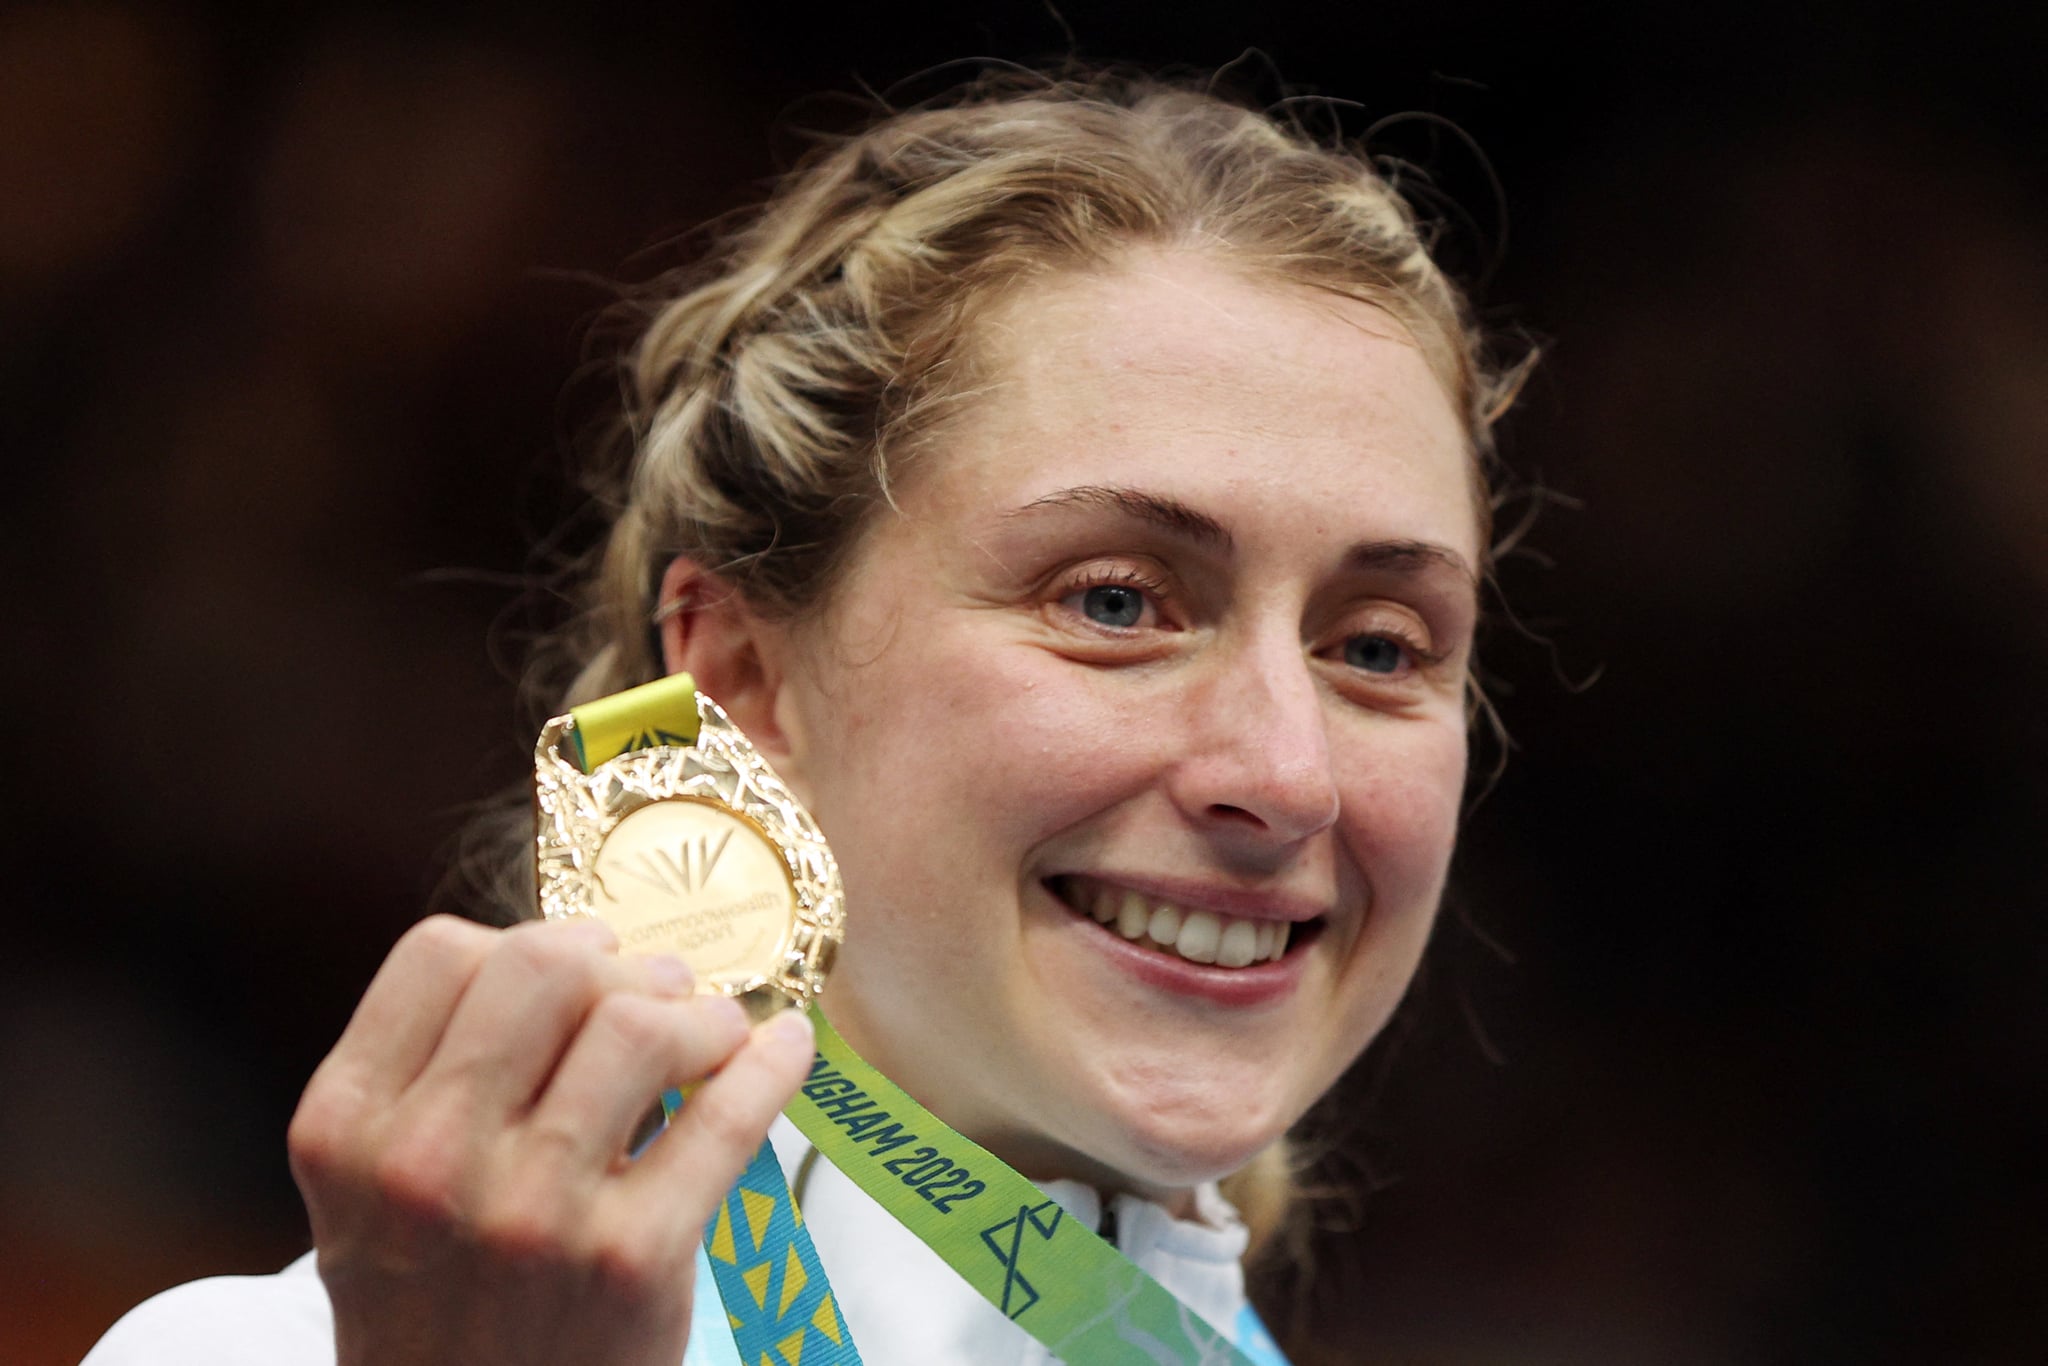 Gold medallist England's Laura Kenny celebrates during the medal presentation ceremony for the women's 10km scratch race on day four of the Commonwealth Games, at the Lee Valley VeloPark in east London, on August 1, 2022. (Photo by ADRIAN DENNIS / AFP) (Photo by ADRIAN DENNIS/AFP via Getty Images)